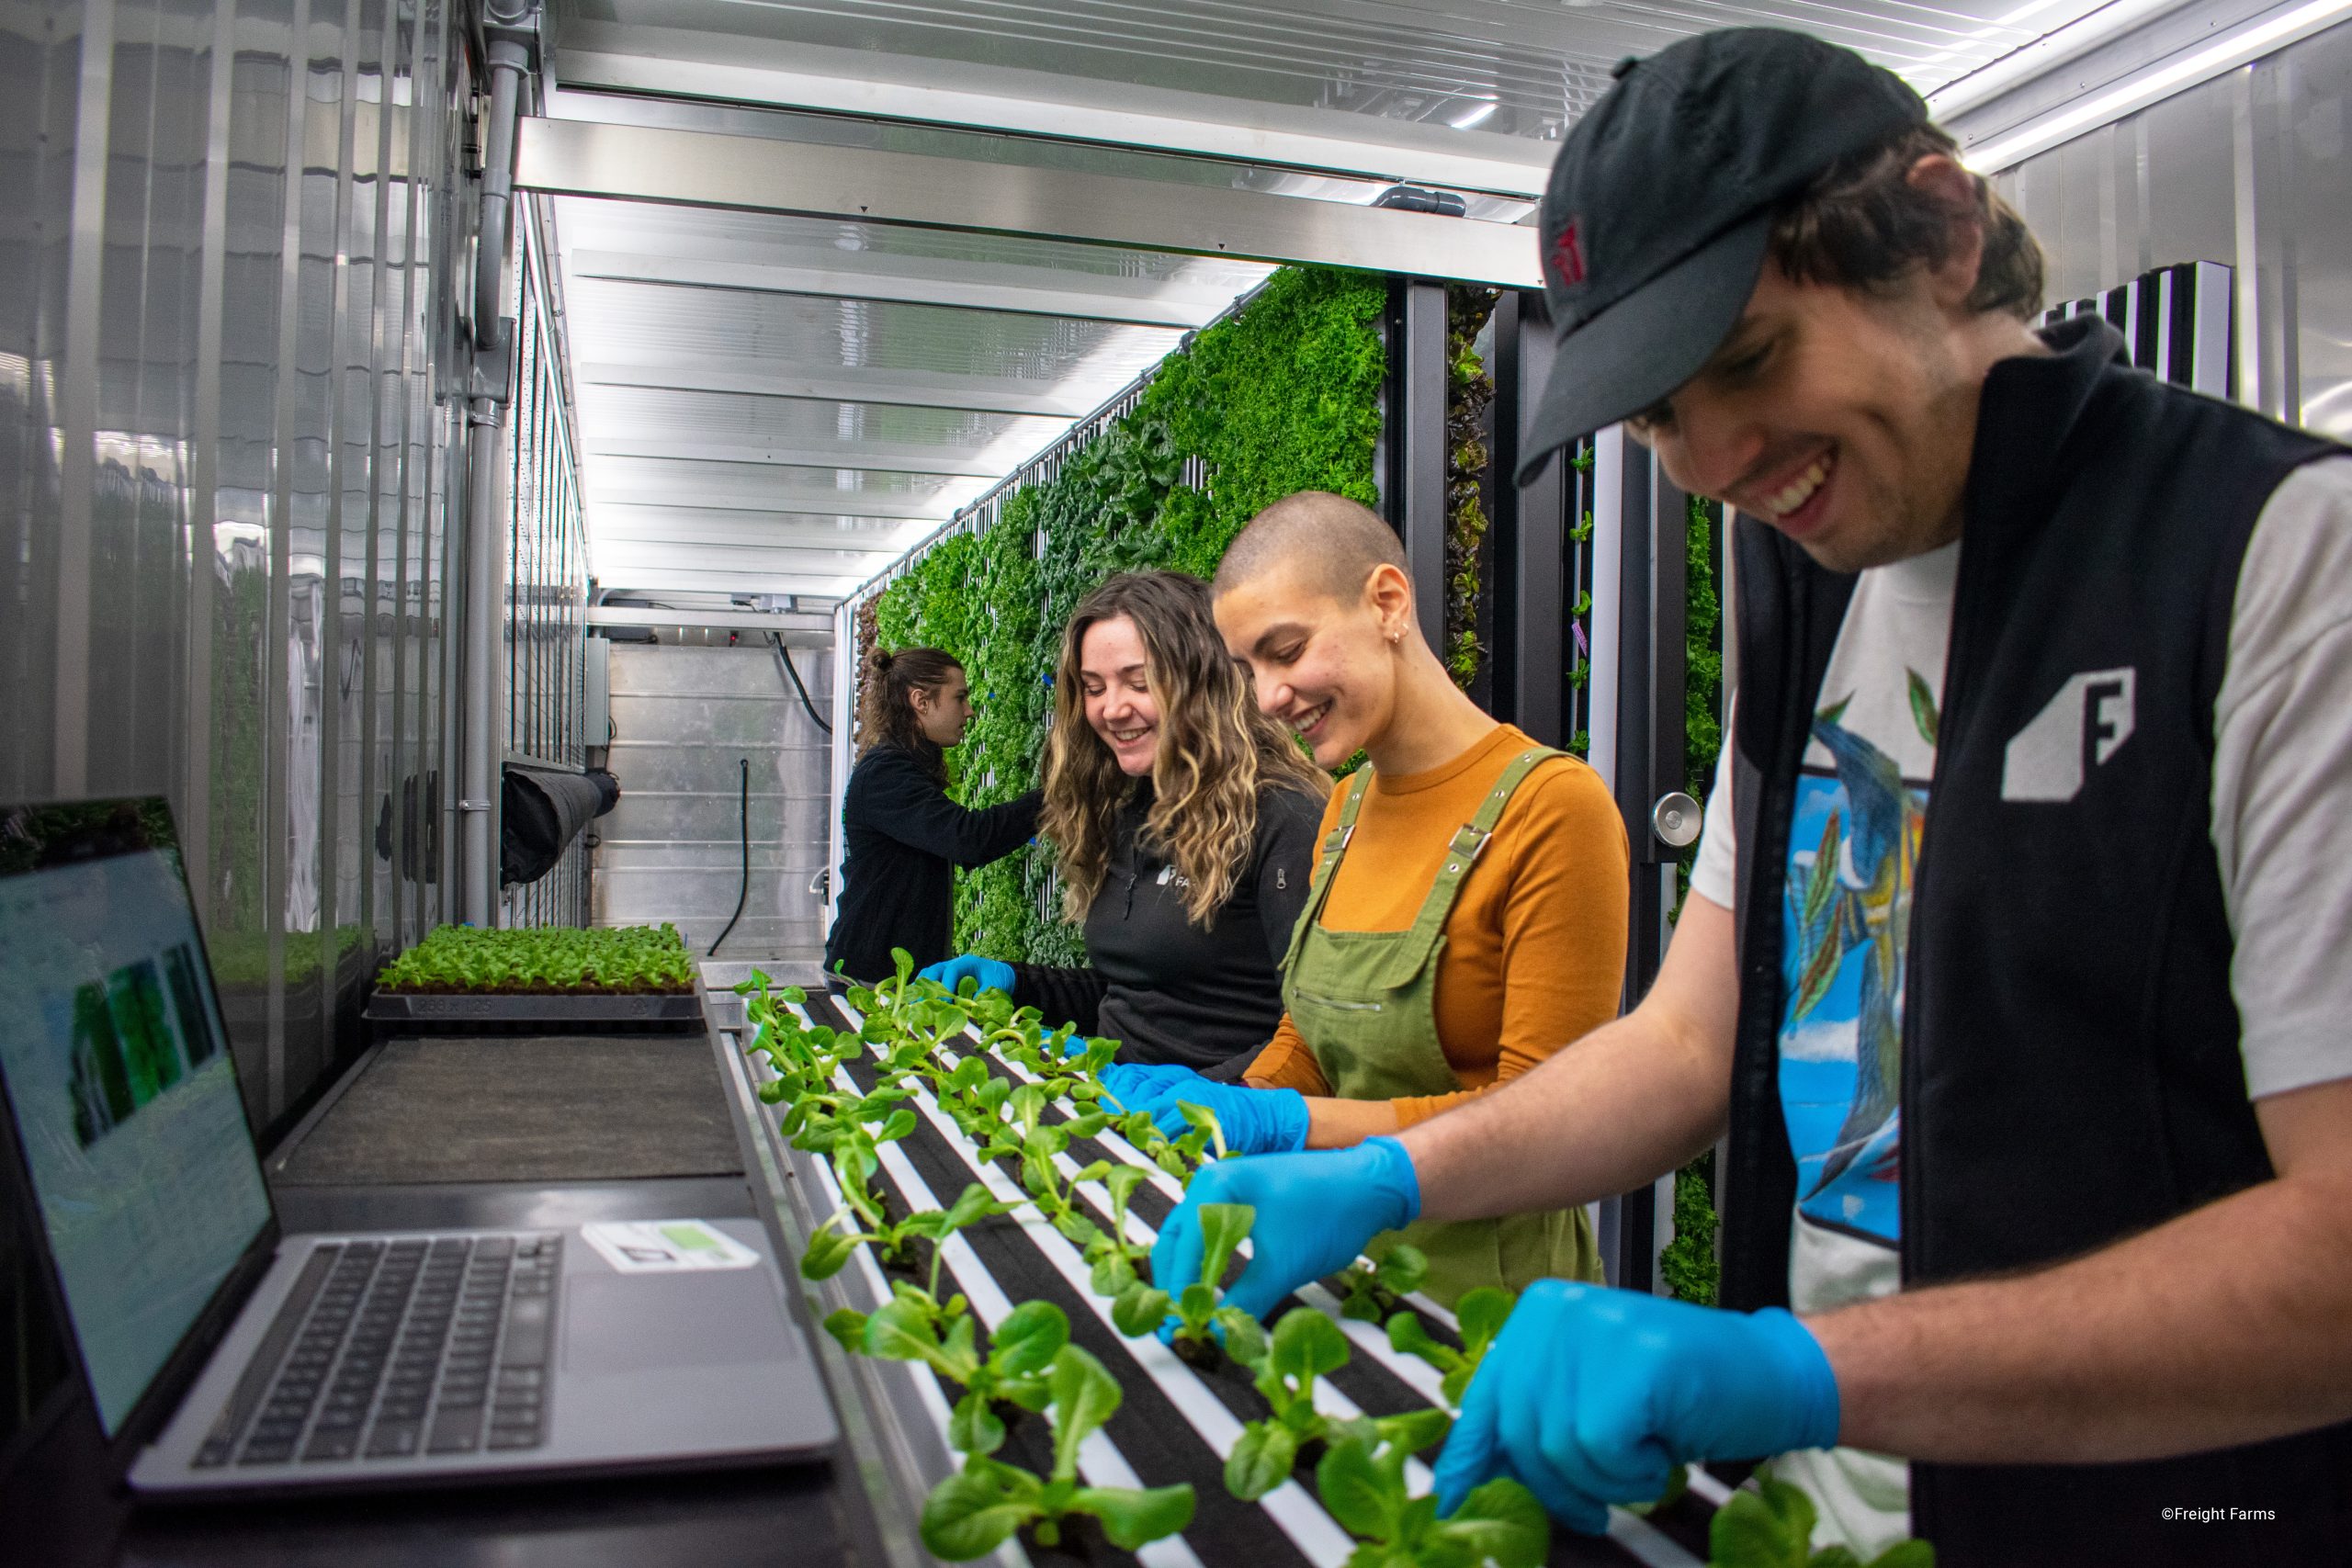 Freight Farms operation inside a shipping container. Three people pick hydroponic lettuce plants.